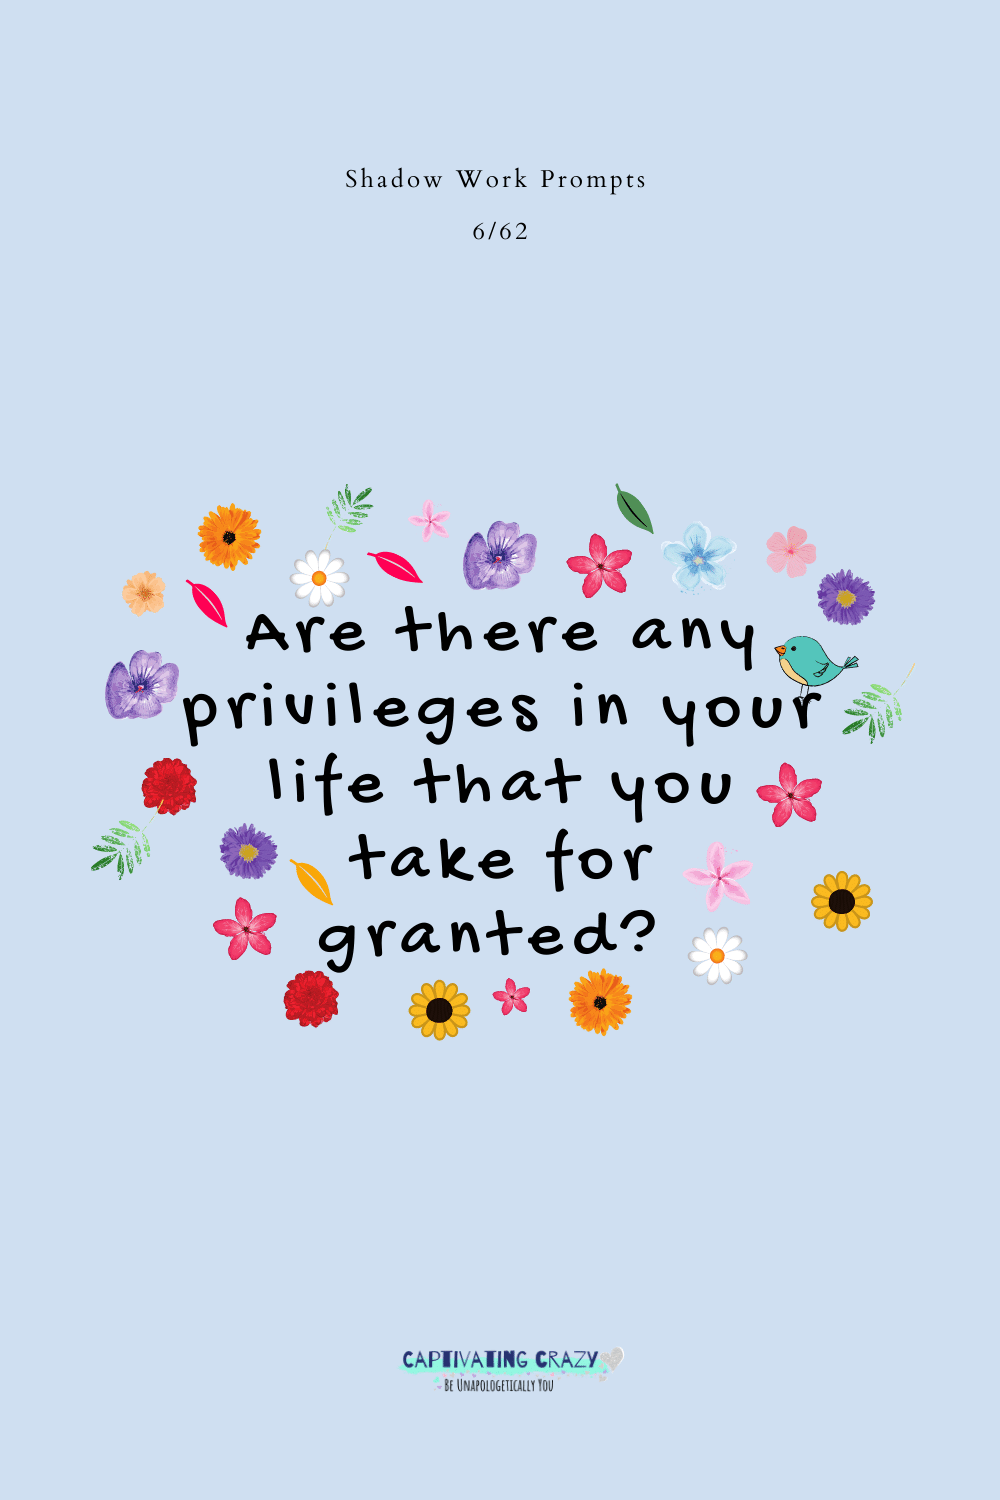 Are there any privileges in your life that you take for granted?